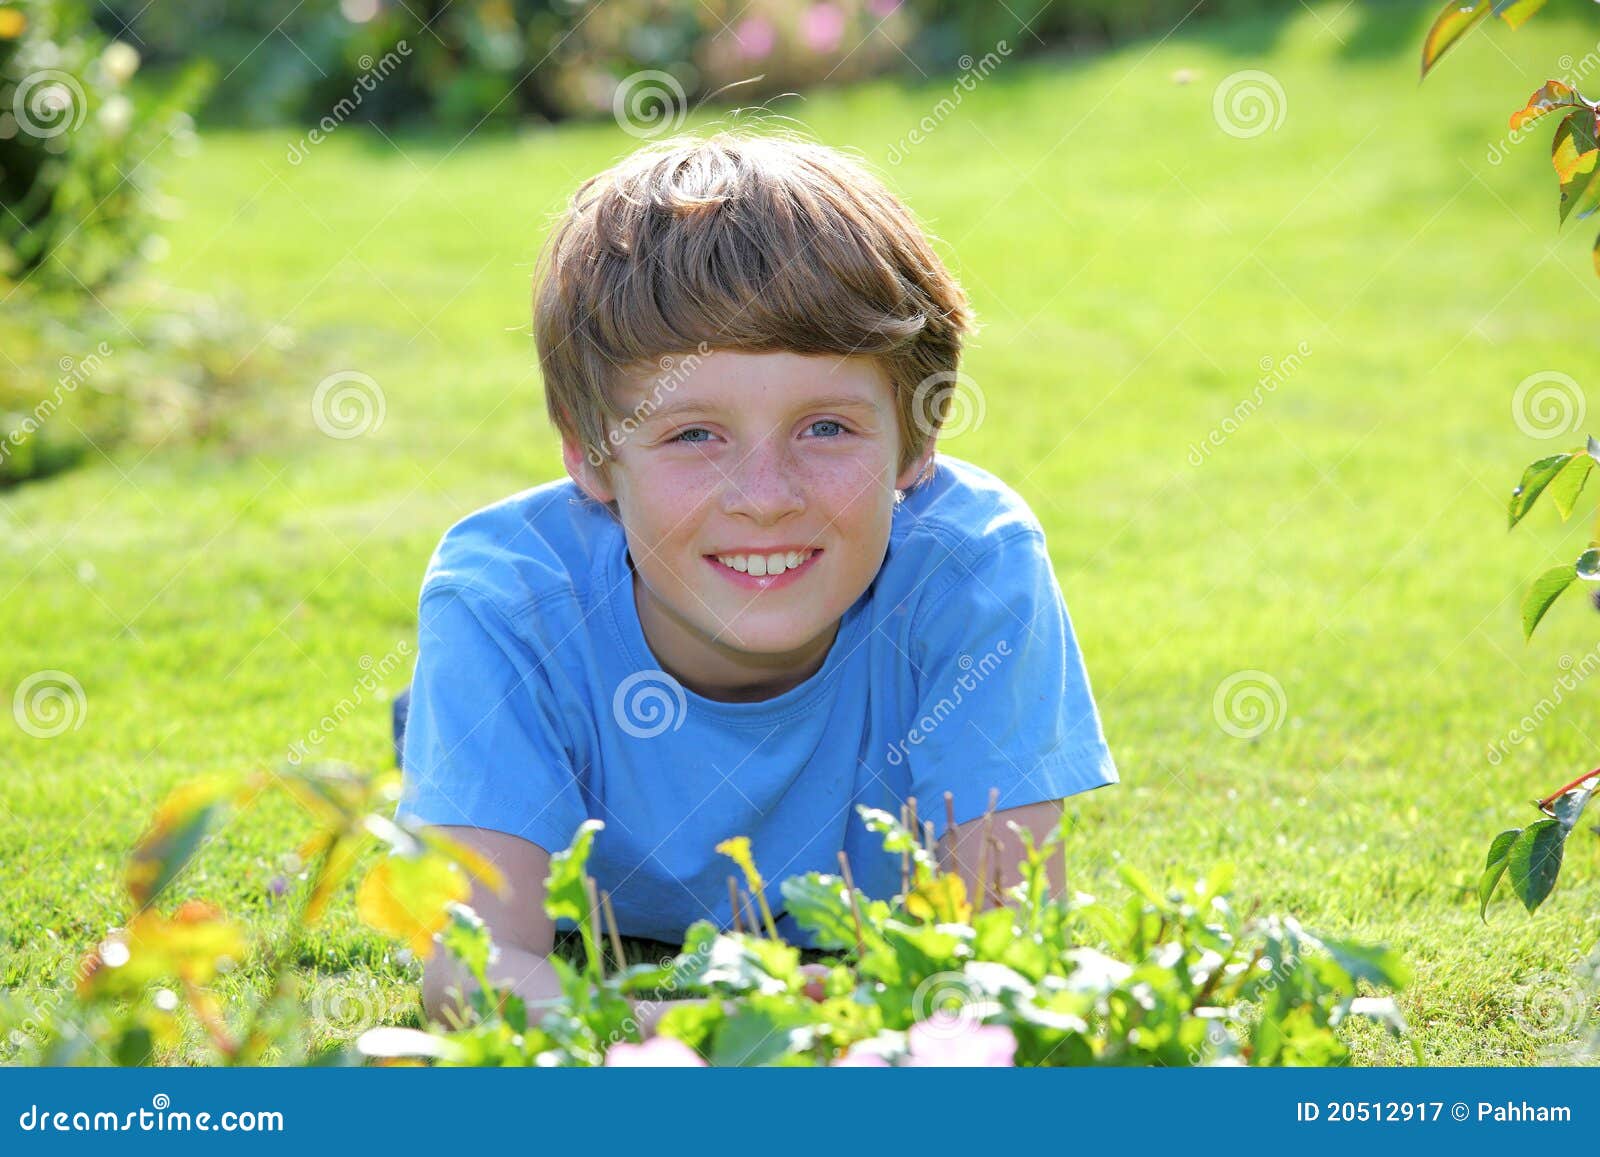 Relaxed boy. Portrait of a relaxed young teenage boy in the garden